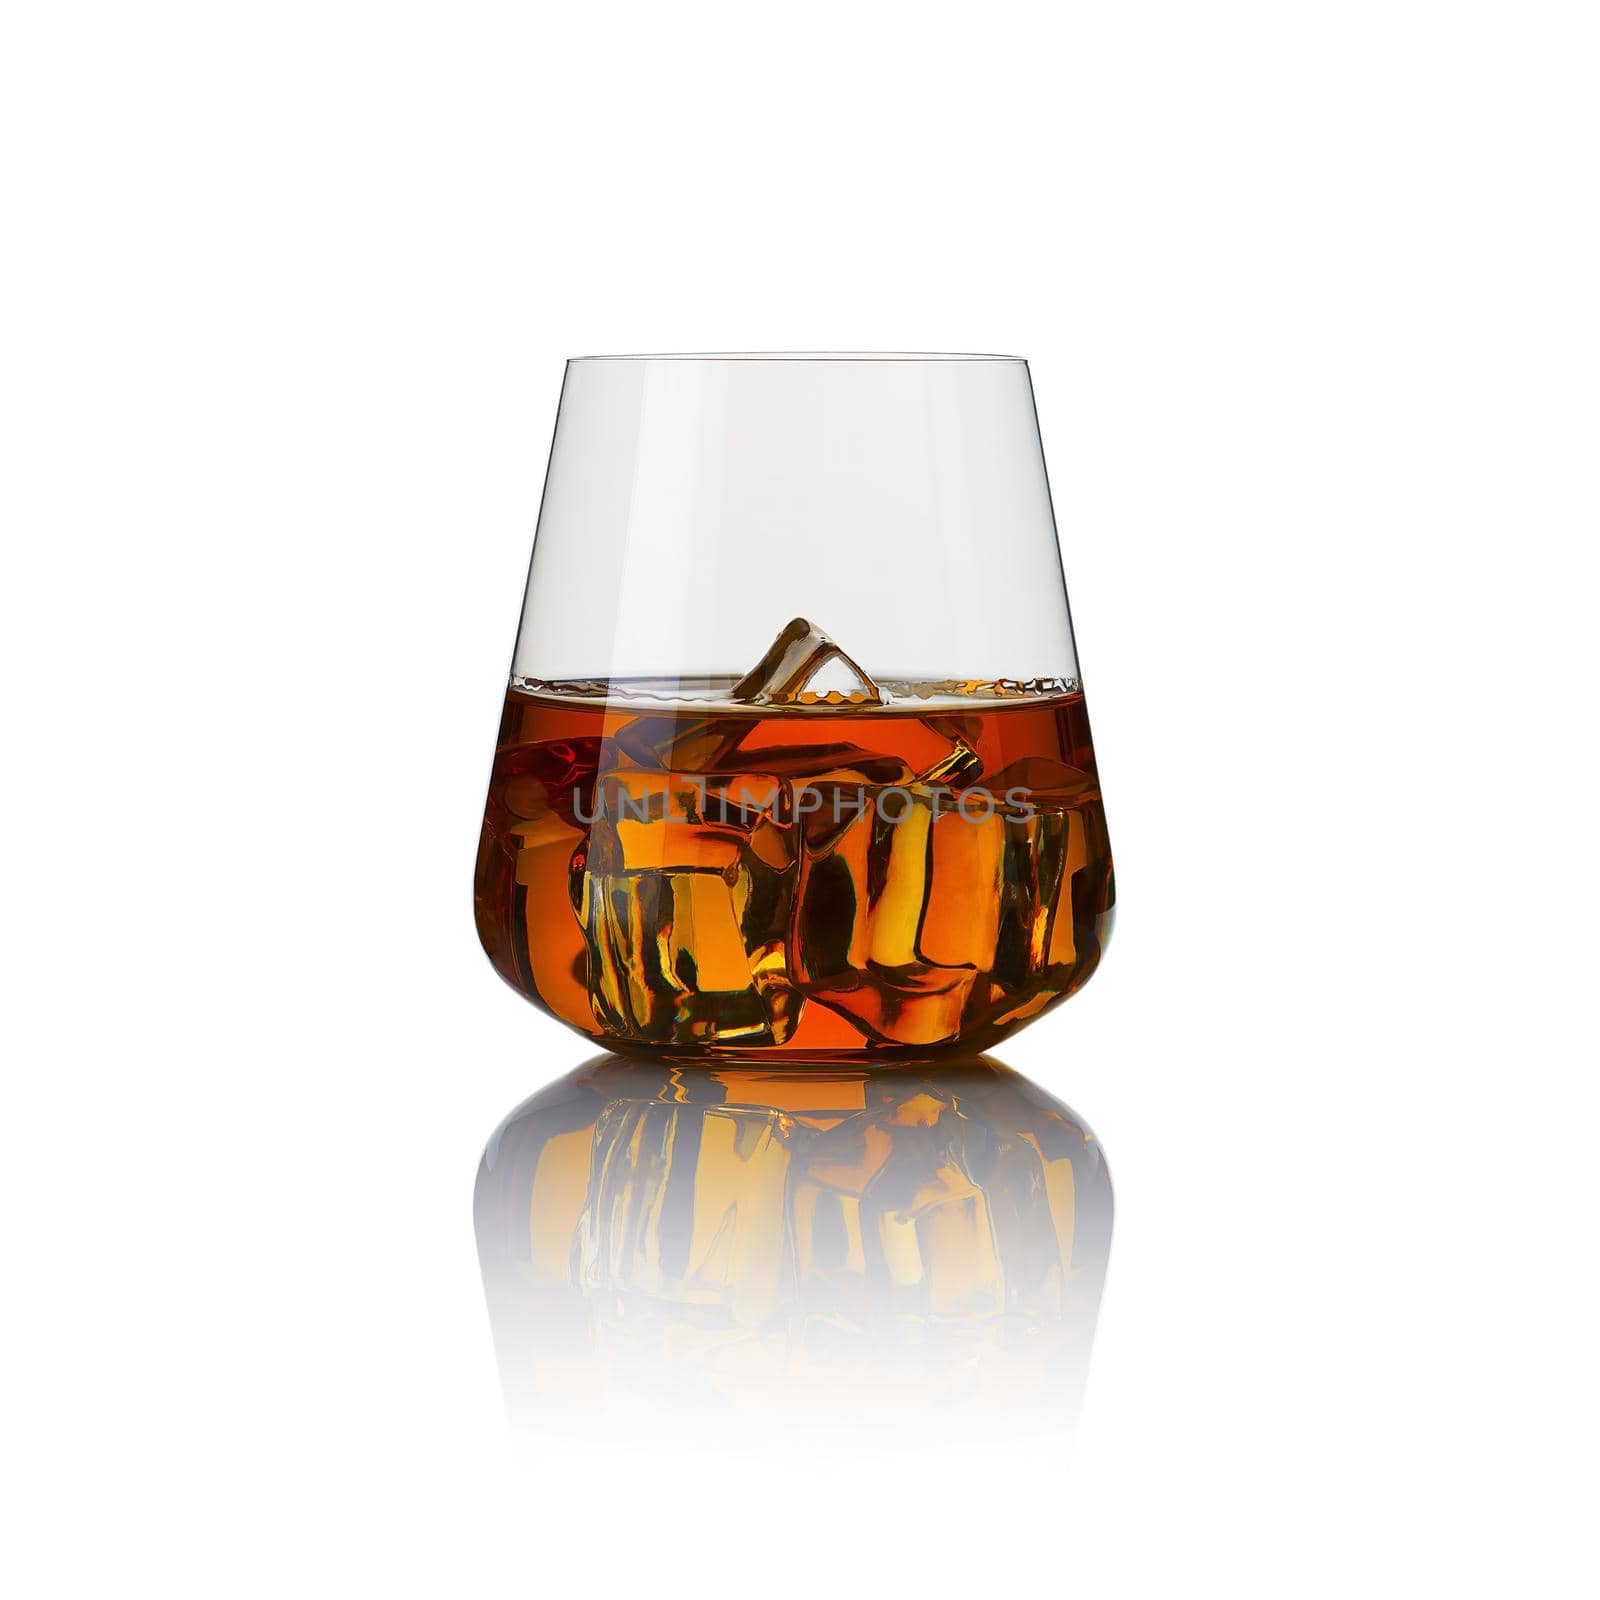 Glass of whisky - with ice and reflection, studio shot. Isolated on white